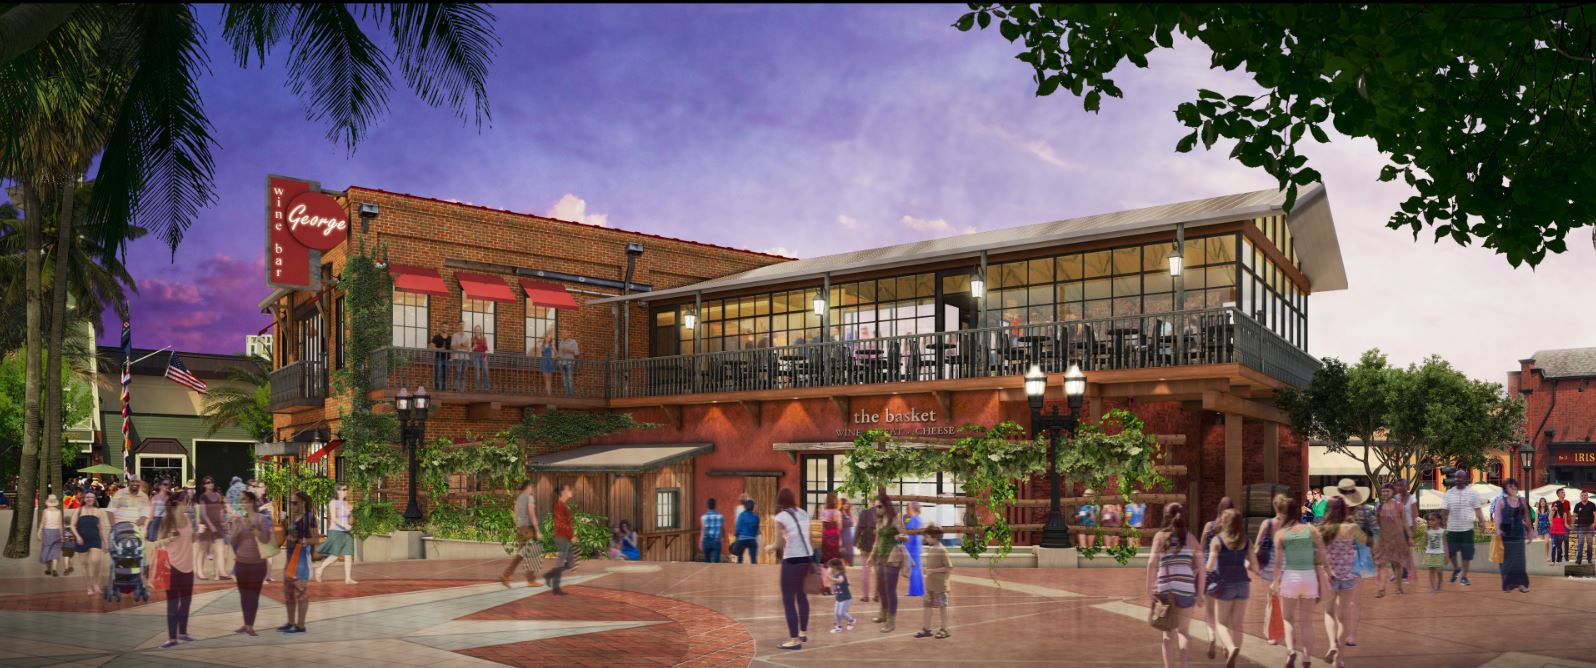 A First Look at Wine Bar George Coming to Disney Springs In Fall 2017